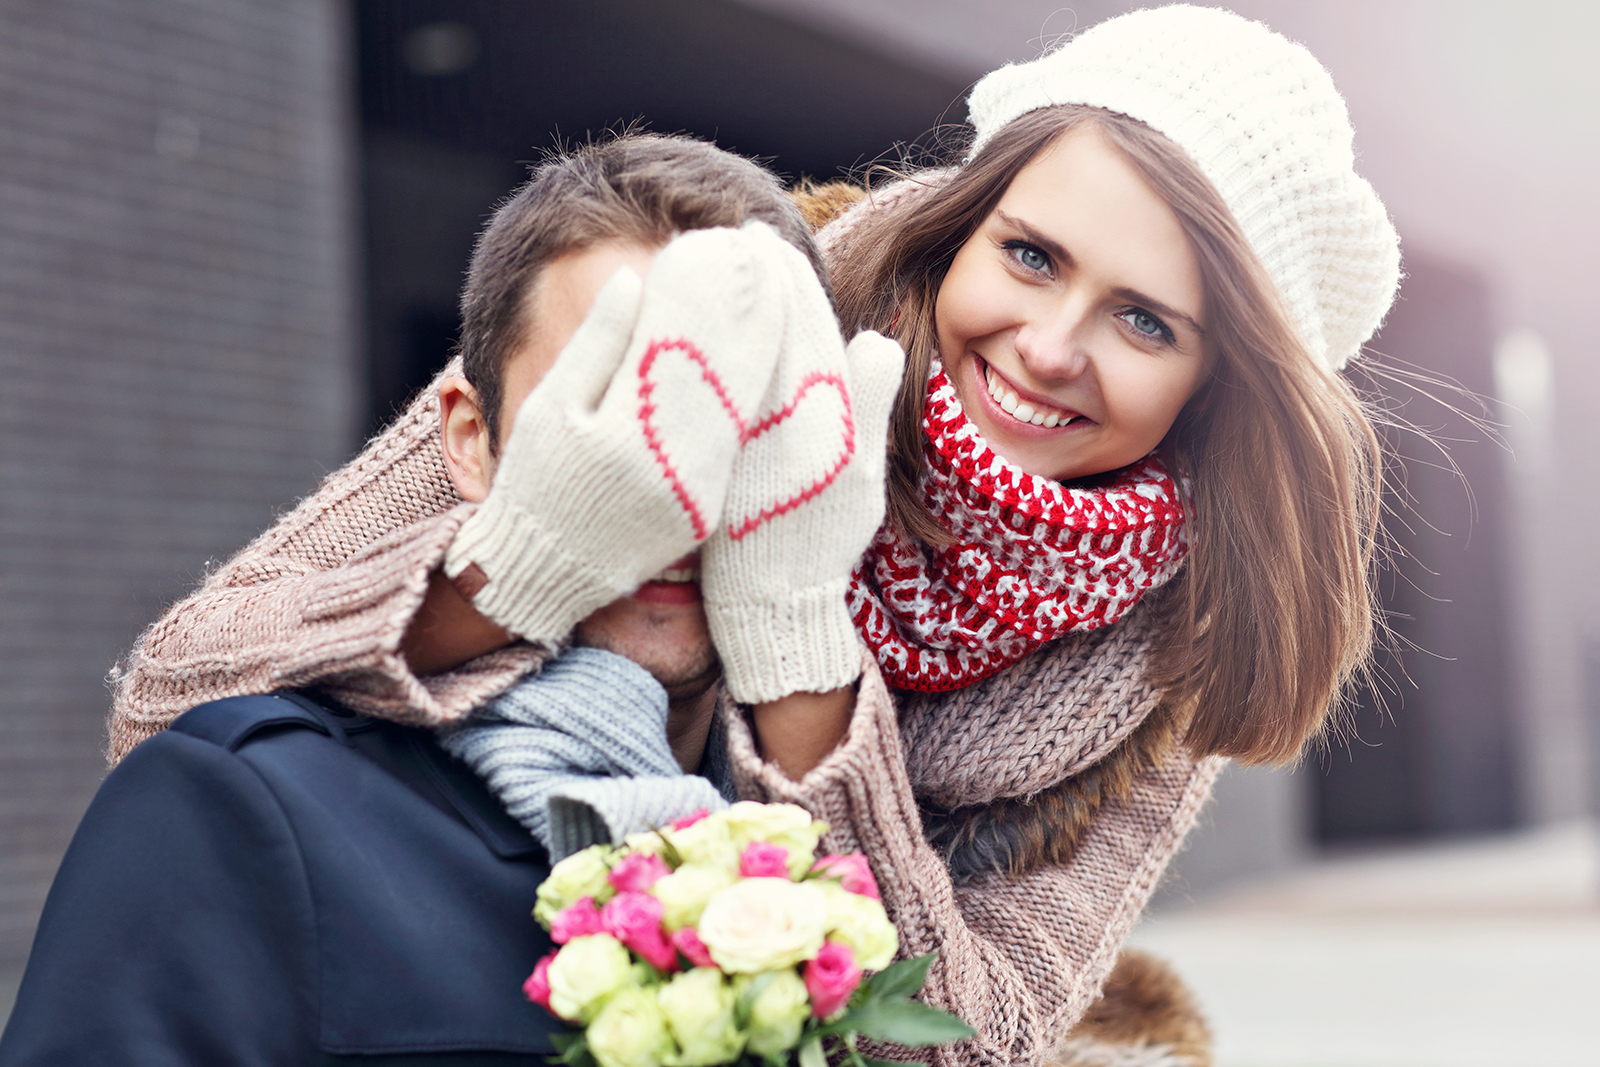 Ask Your Forney Dentist: Don’t Let Bad Breath Ruin Your Valentine’s Day!